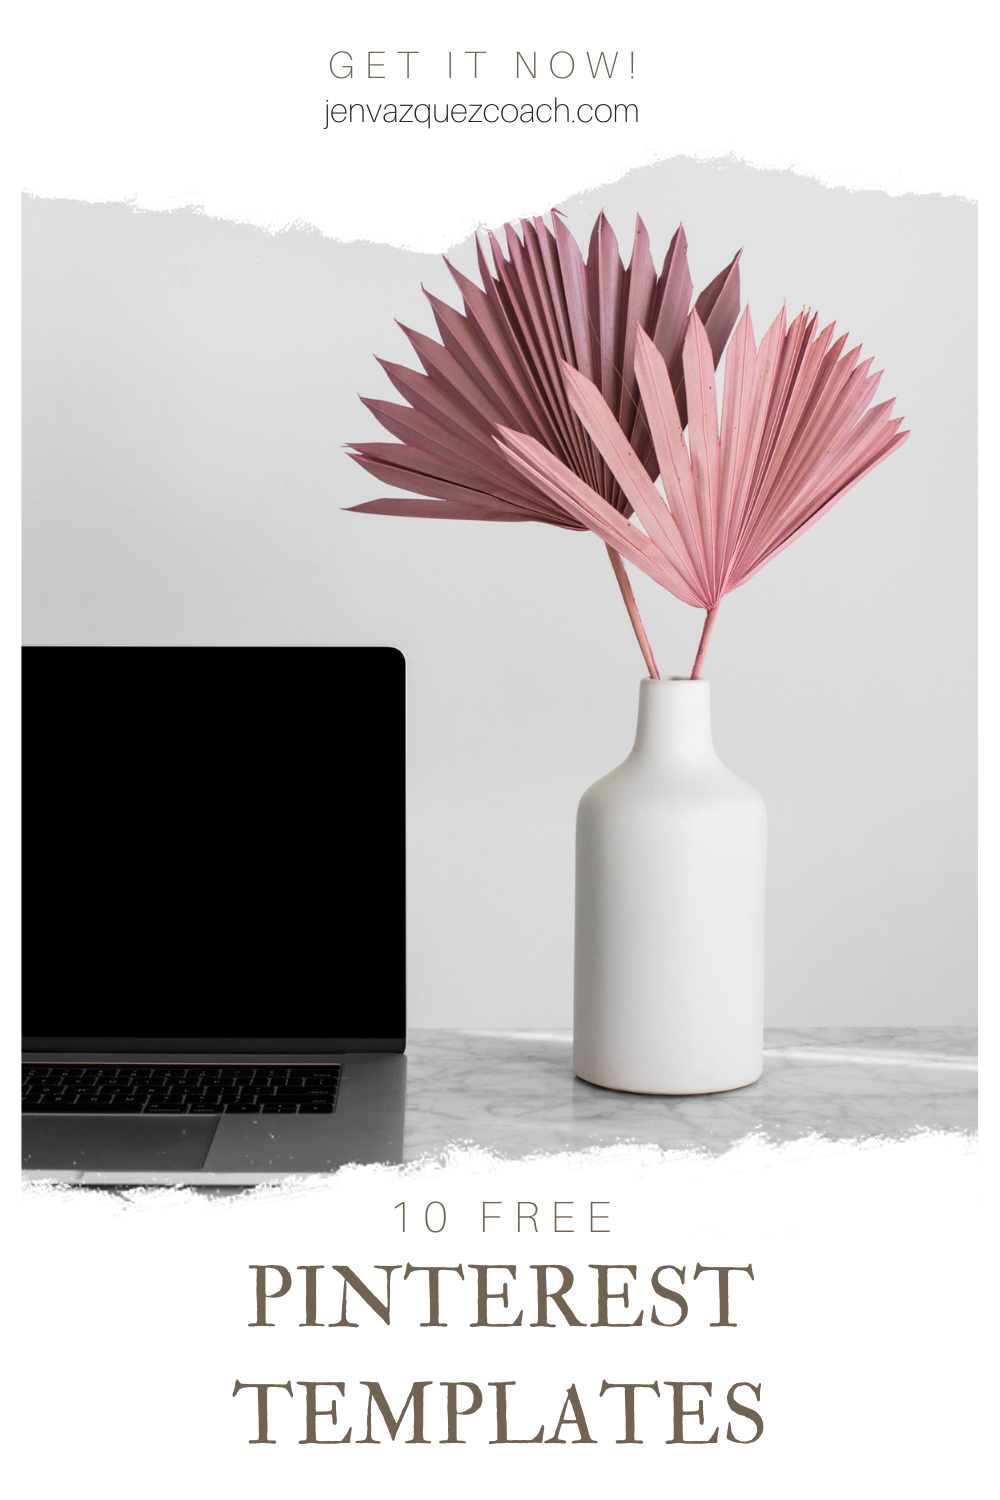 10 Free Pin Templates by Jen Vazquez Marketing Strategist  - Click to download them now